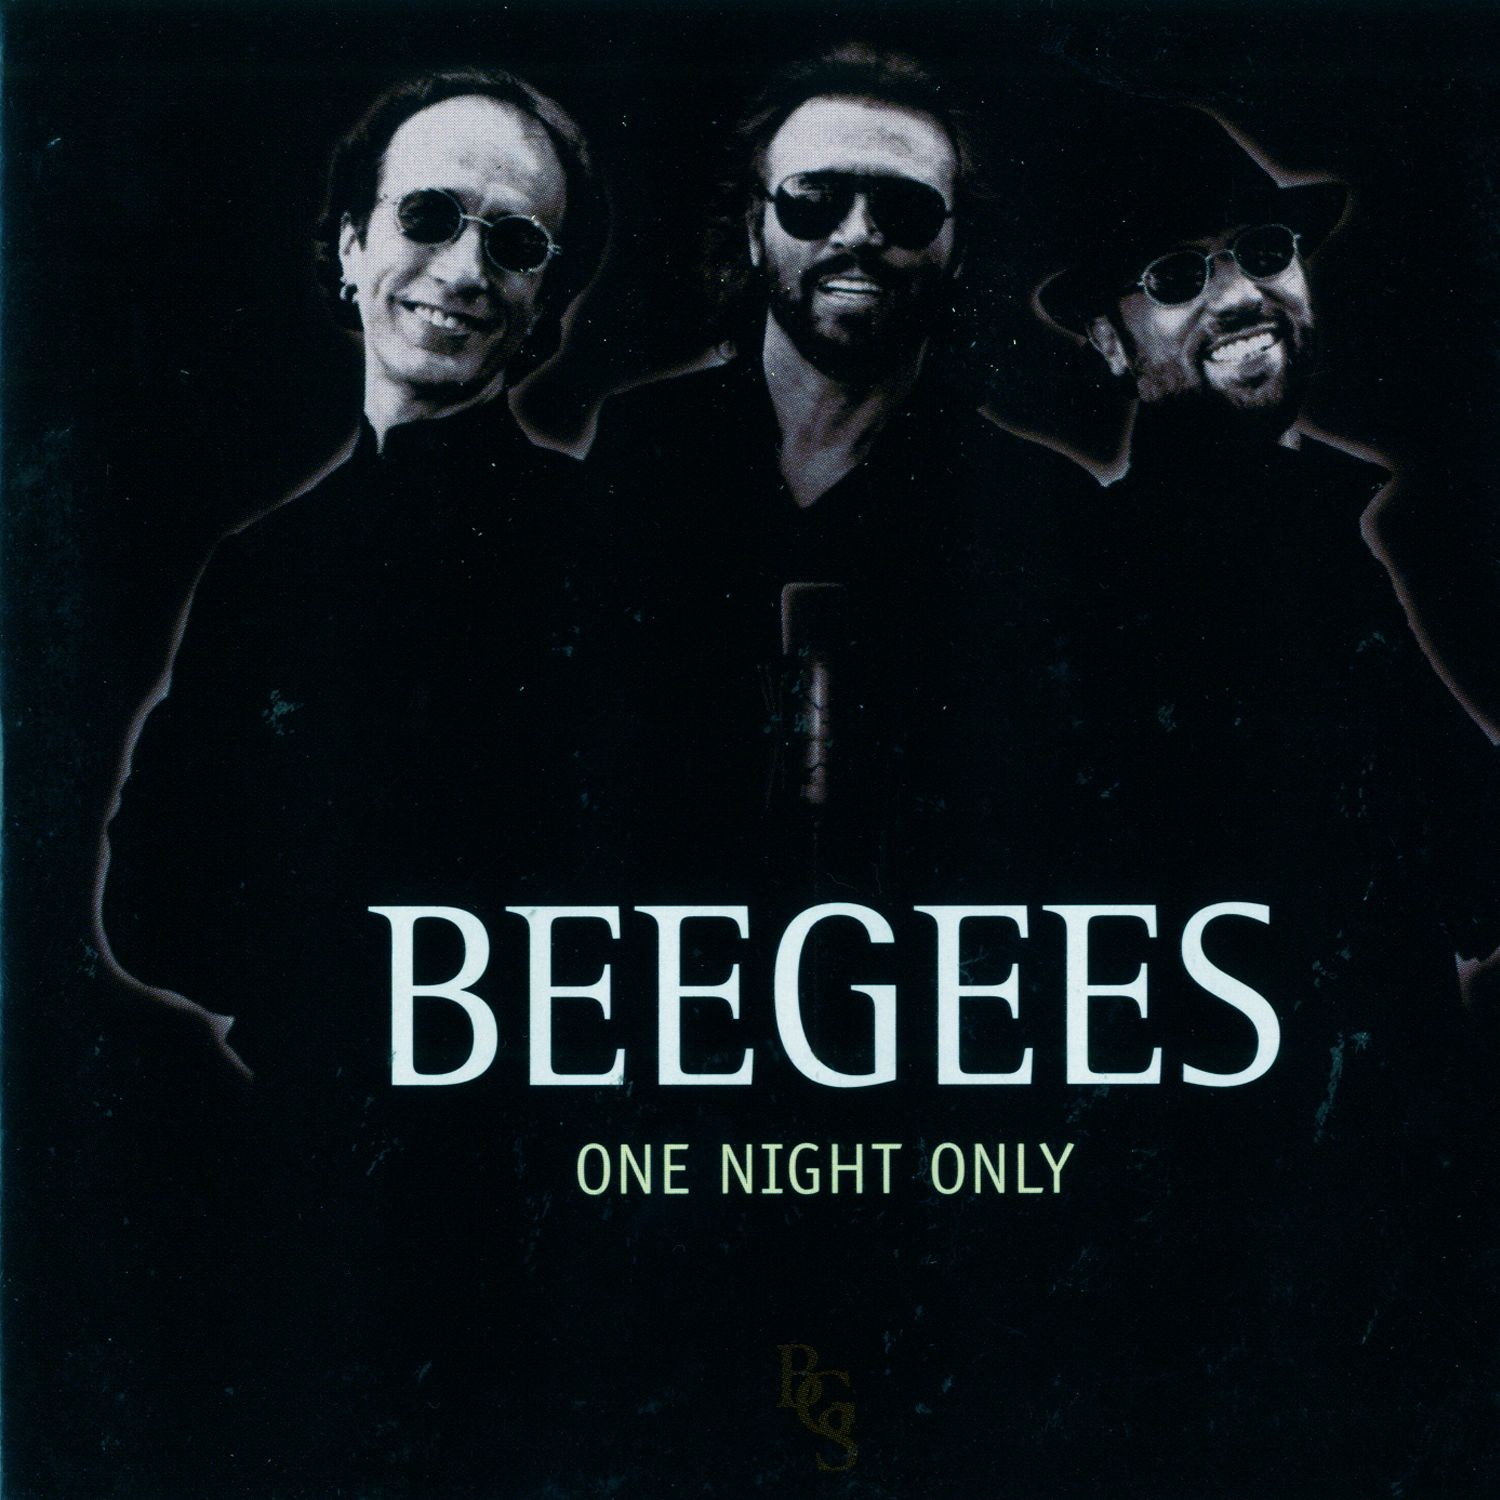 [Bee+Gees+-+One+night+only.jpg]